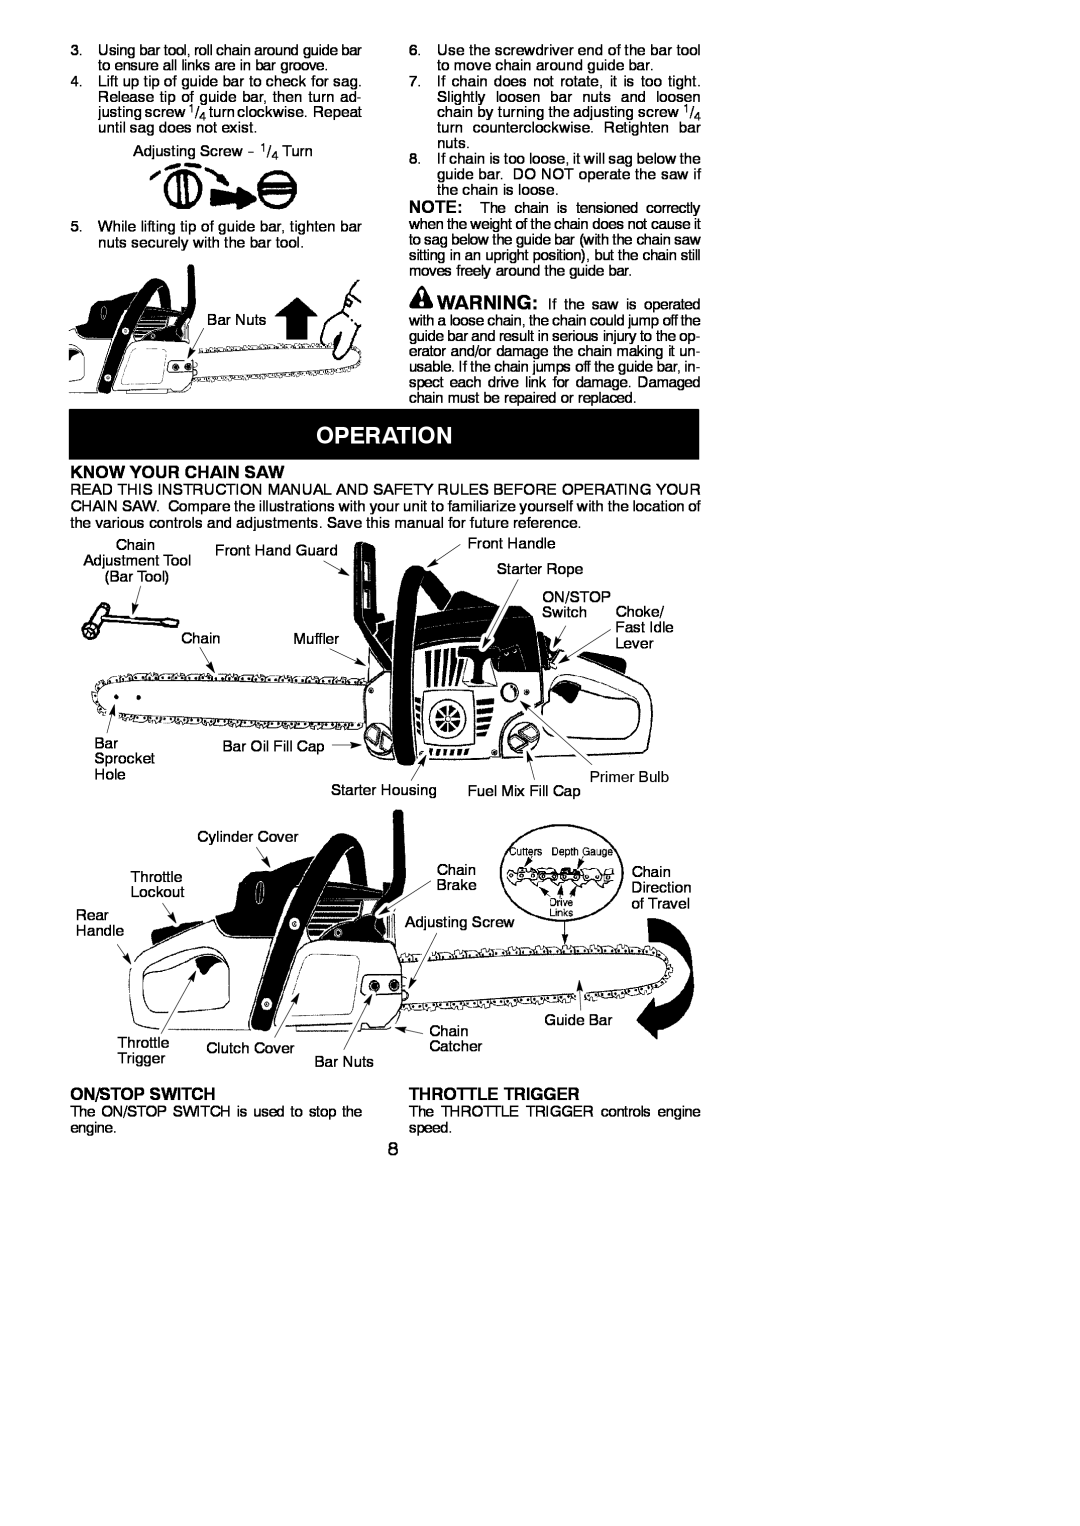 Poulan 966063101 instruction manual Operation, Know Your Chain Saw, On/Stop Switch, Throttle Trigger 